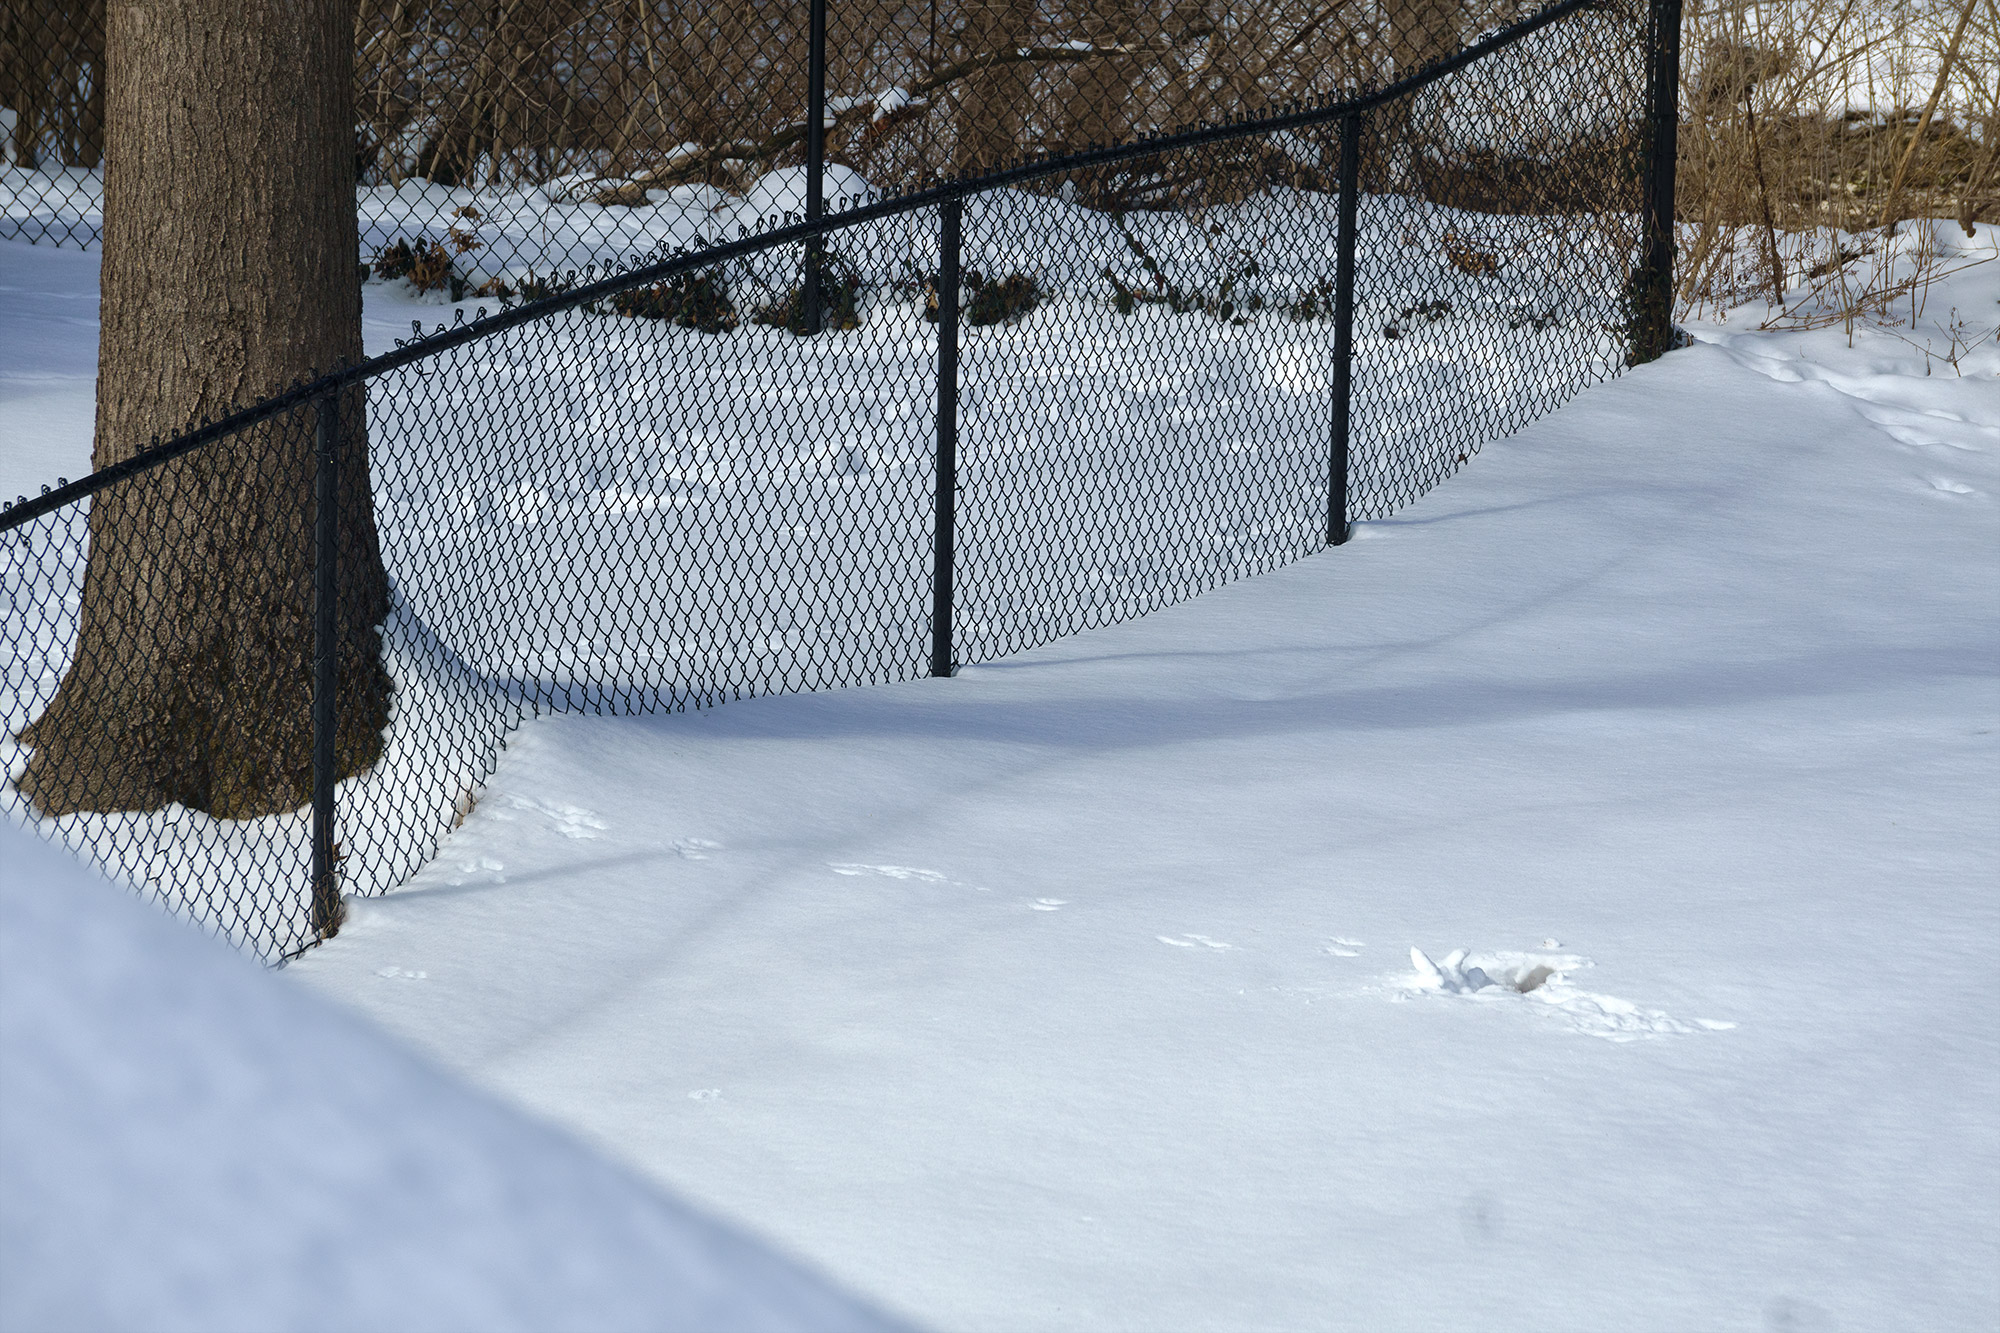 A tree next to a fence in a snow-covered yard. There is a small crater of snow with one set of animal tracks between it and the tree.